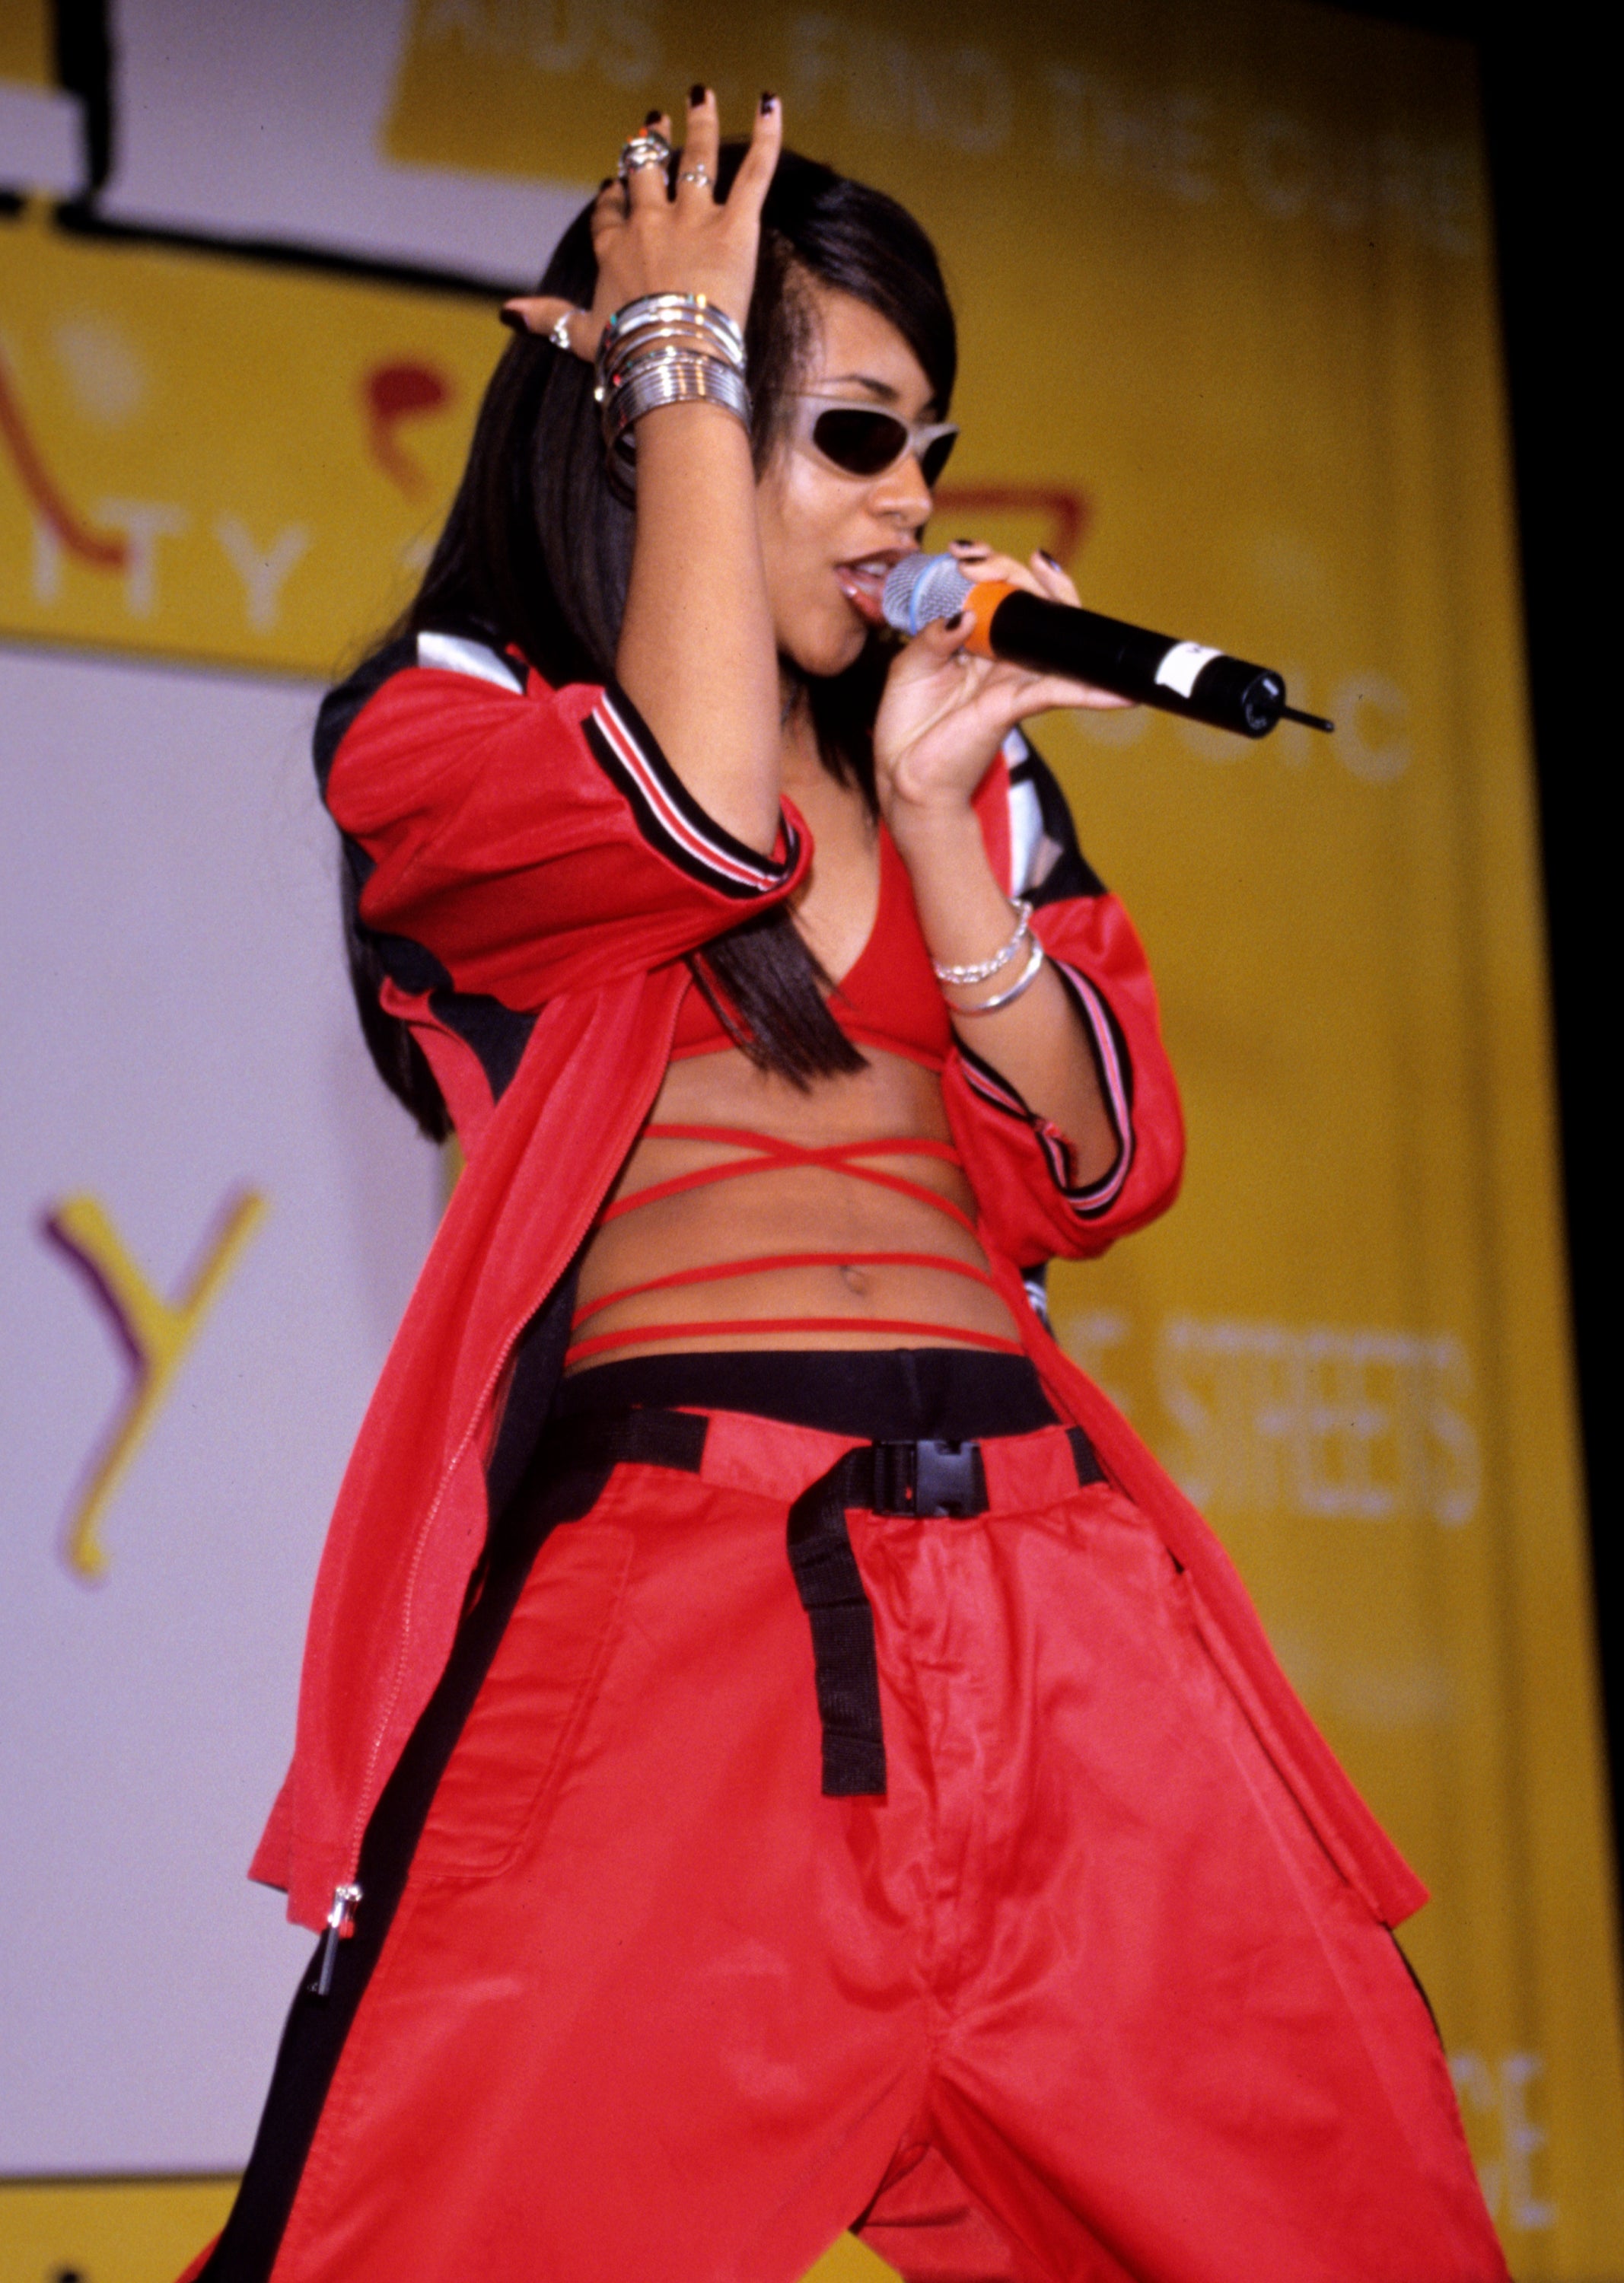 12 Throwback Photos of Aaliyah's Iconic Style
